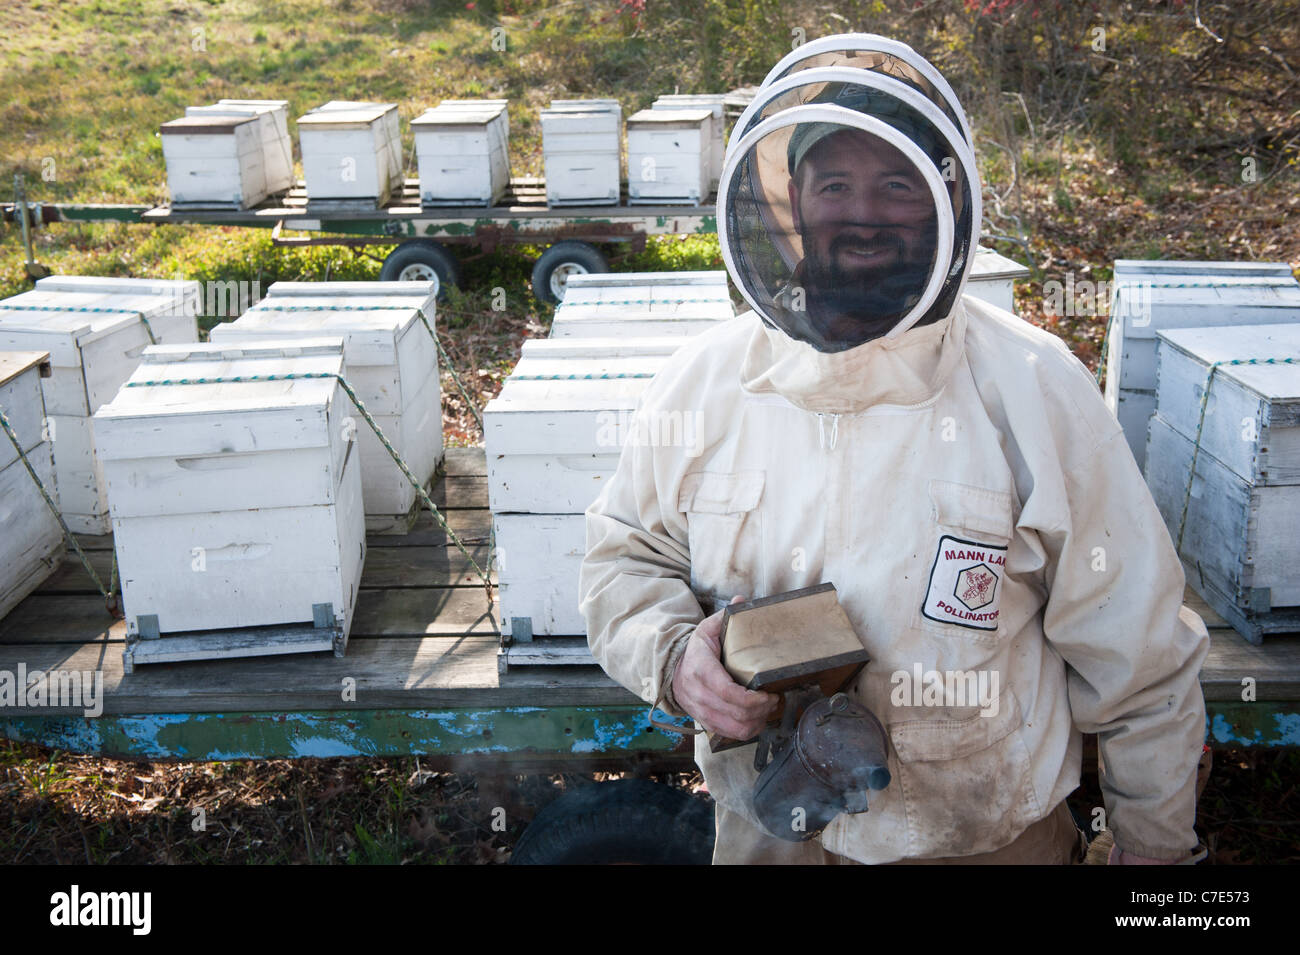 Beekeeper standing in front of hives Stock Photo